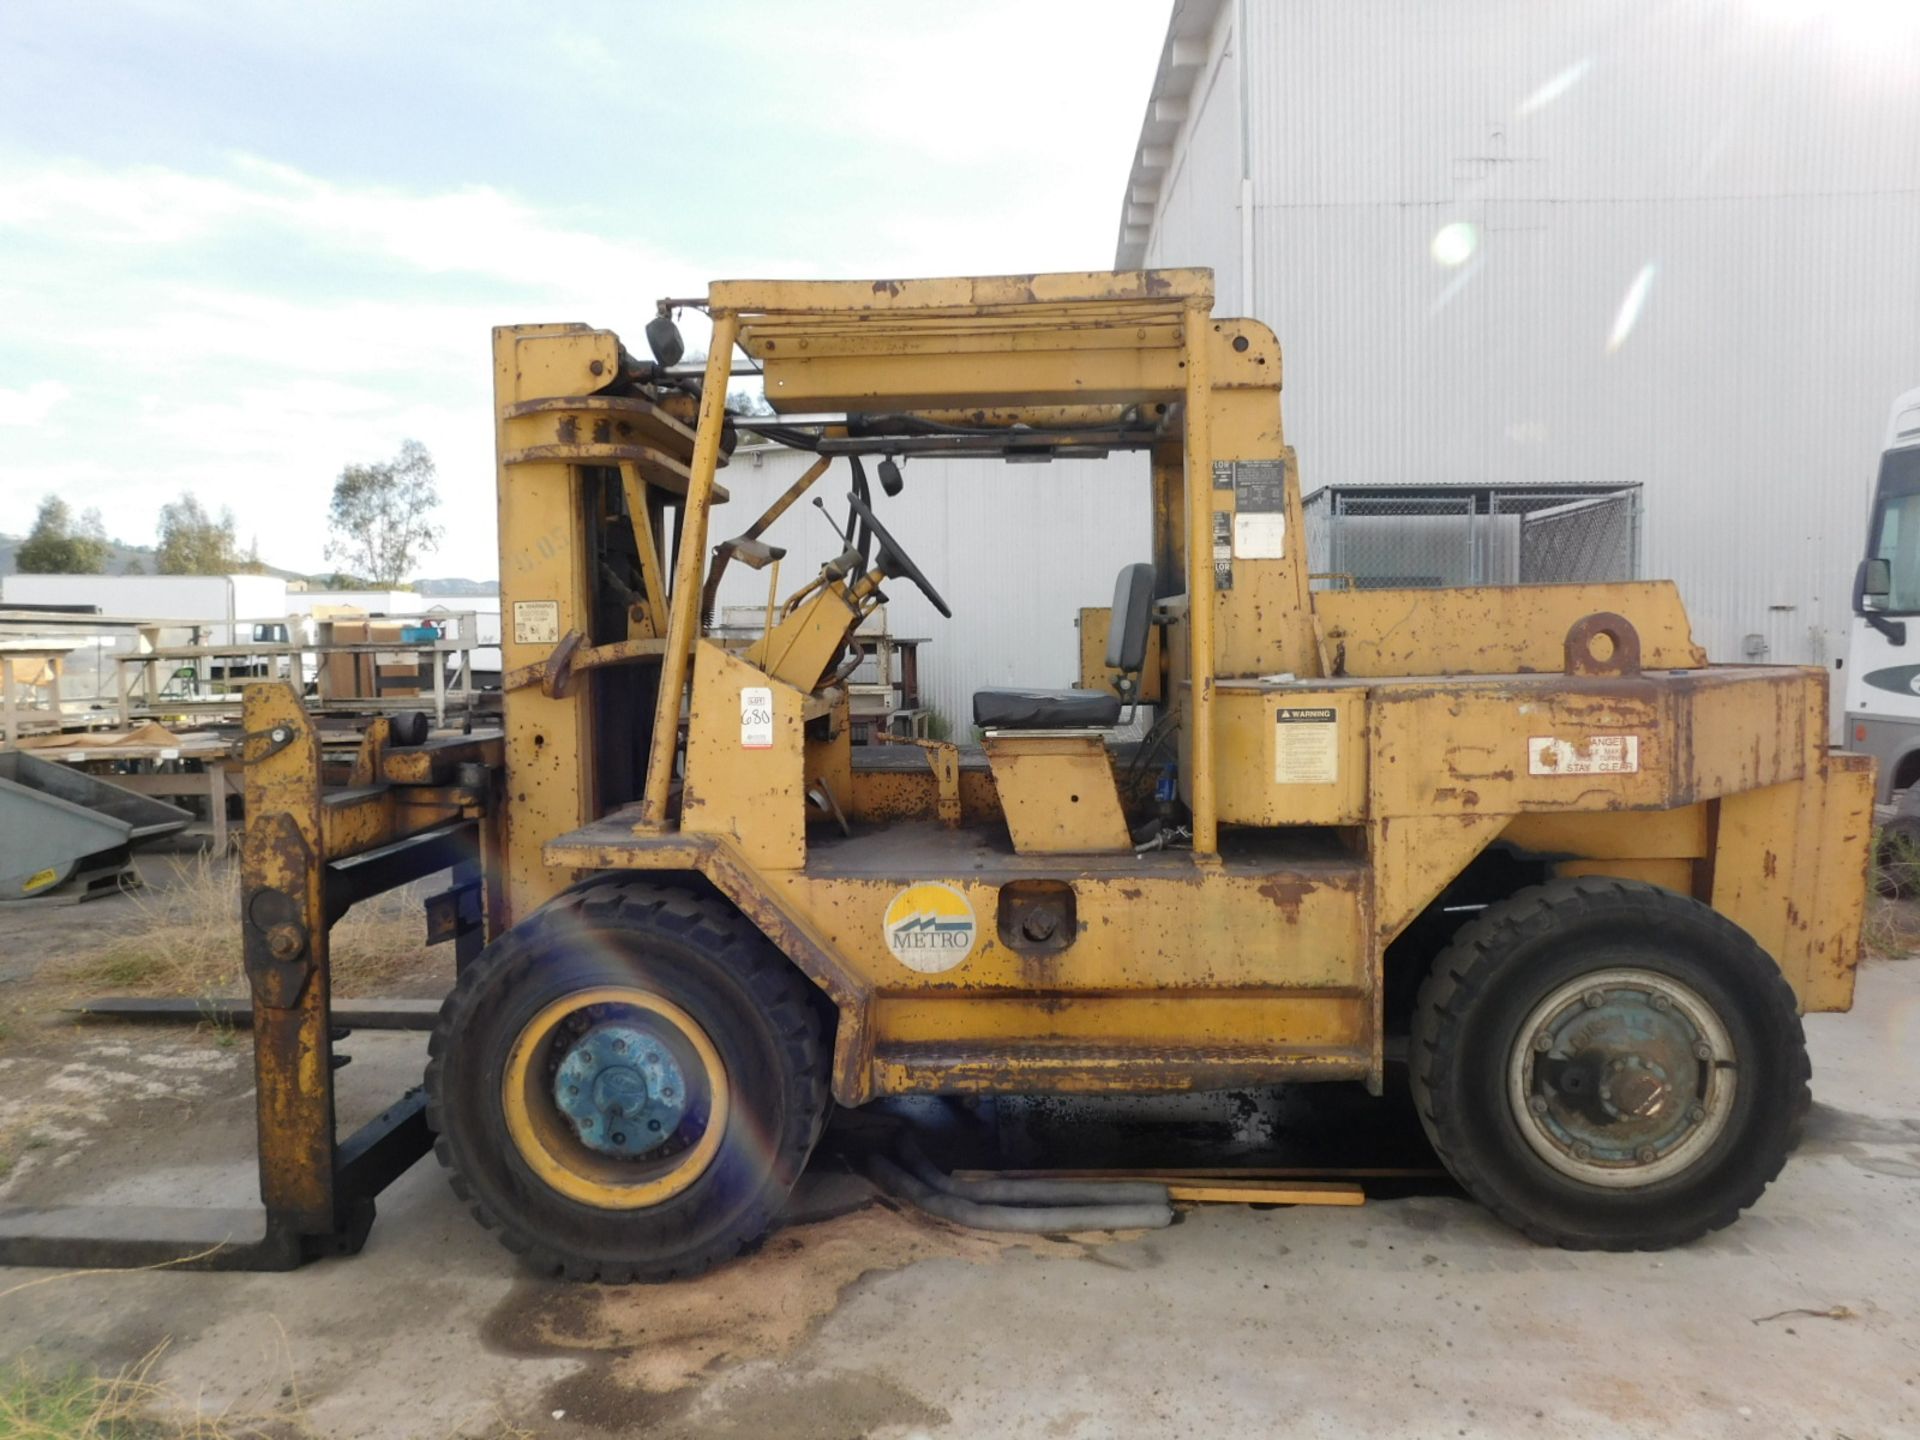 TAYLOR DIESEL FORKLIFT, 30,000 LB CAPACITY, MODEL Y-30-W0S, S/N S-44-13109, APPROX TRUCK WEIGHT 41,